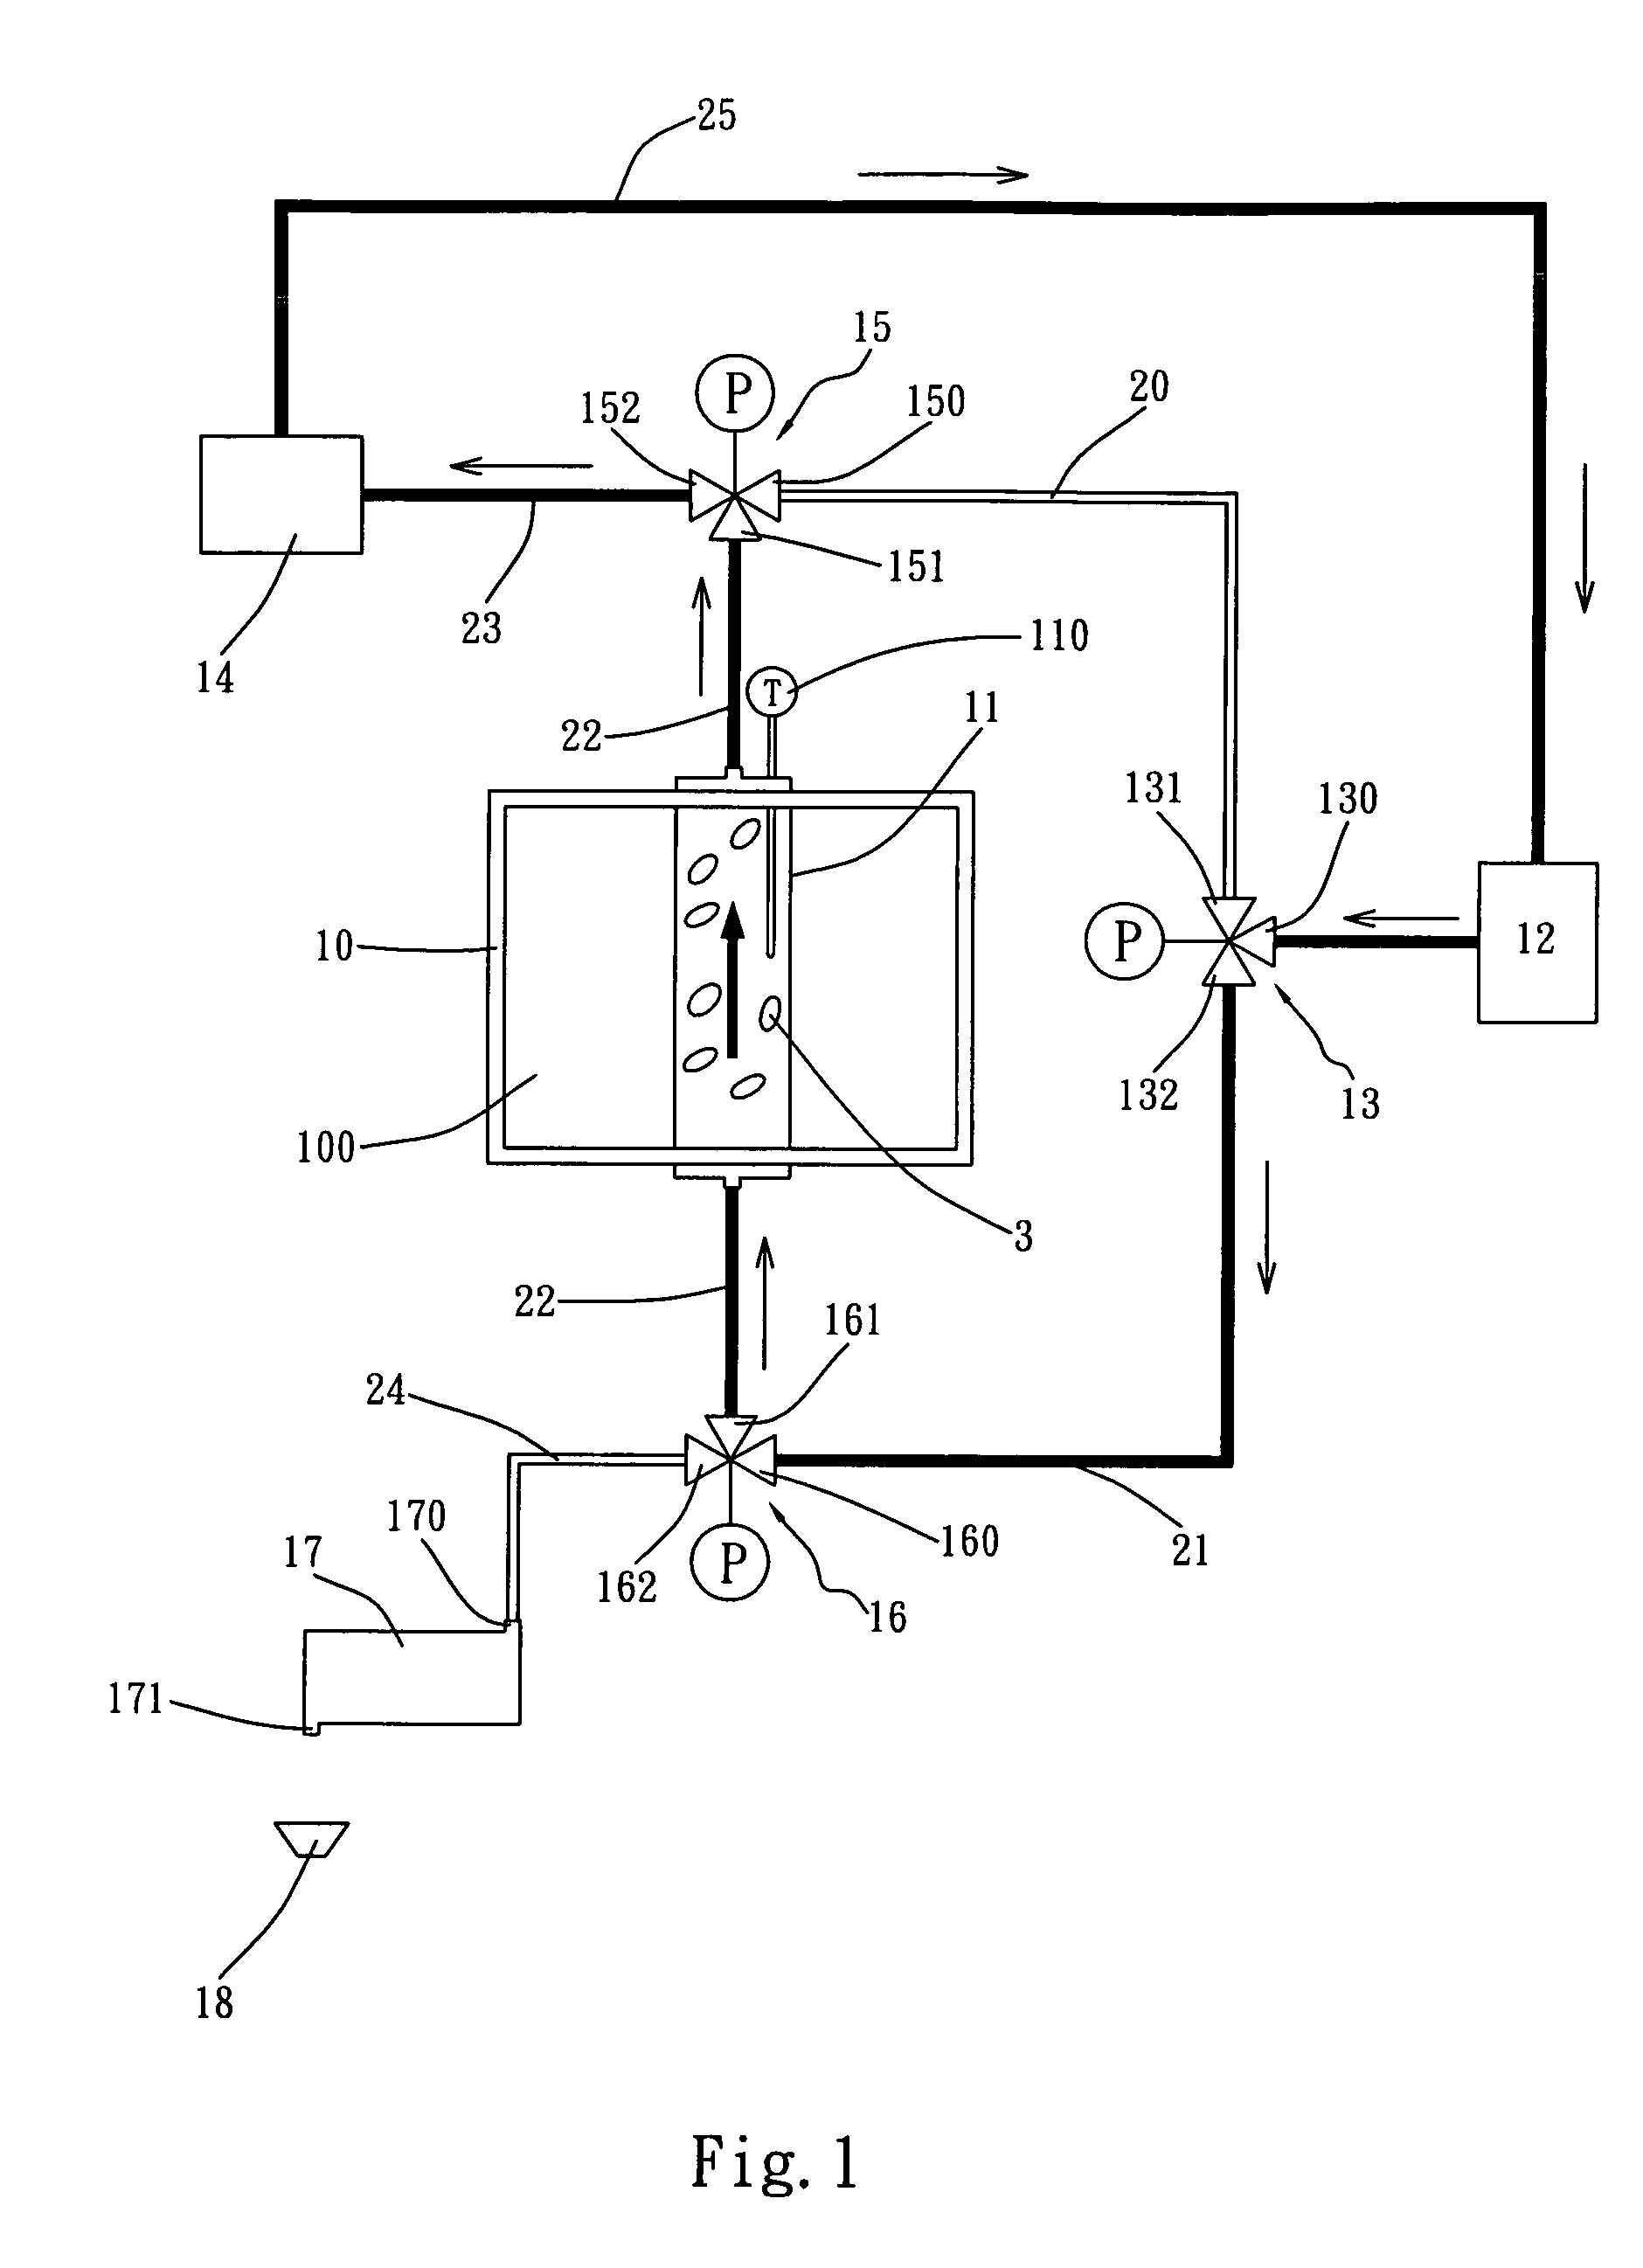 Extraction apparatus and method of extracting essential oils, essence, and pigments from odorous raw material by microwave heating under sub-critical conditions